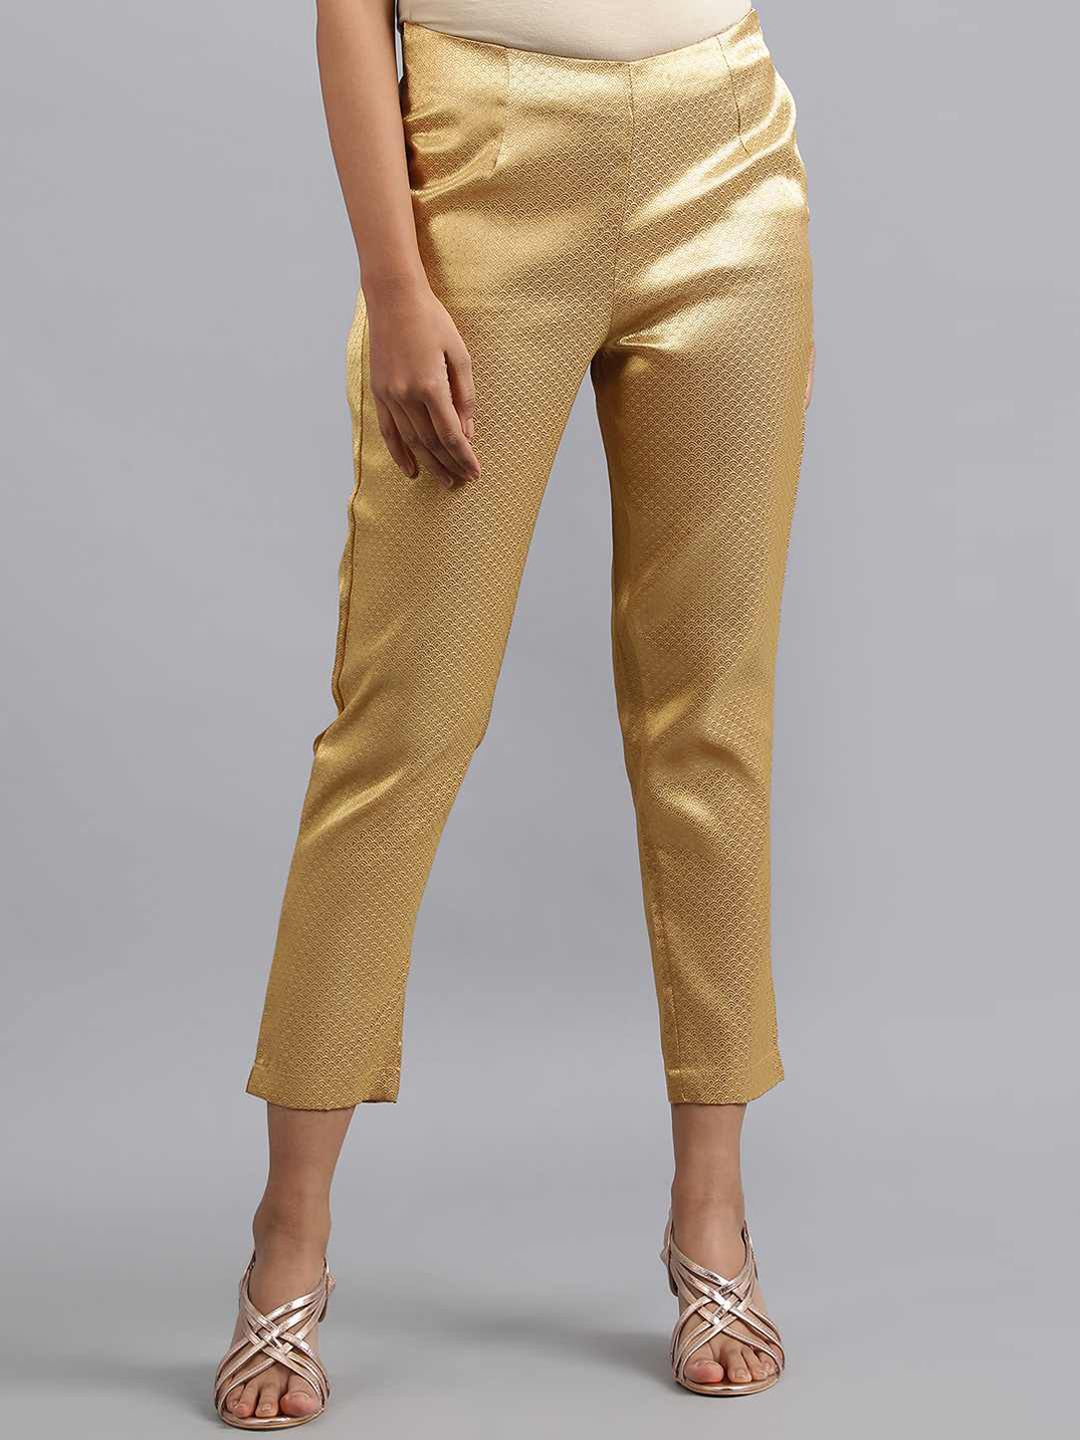 W Women Gold-Toned Printed Slim Fit Pleated Culottes Trousers Price in India